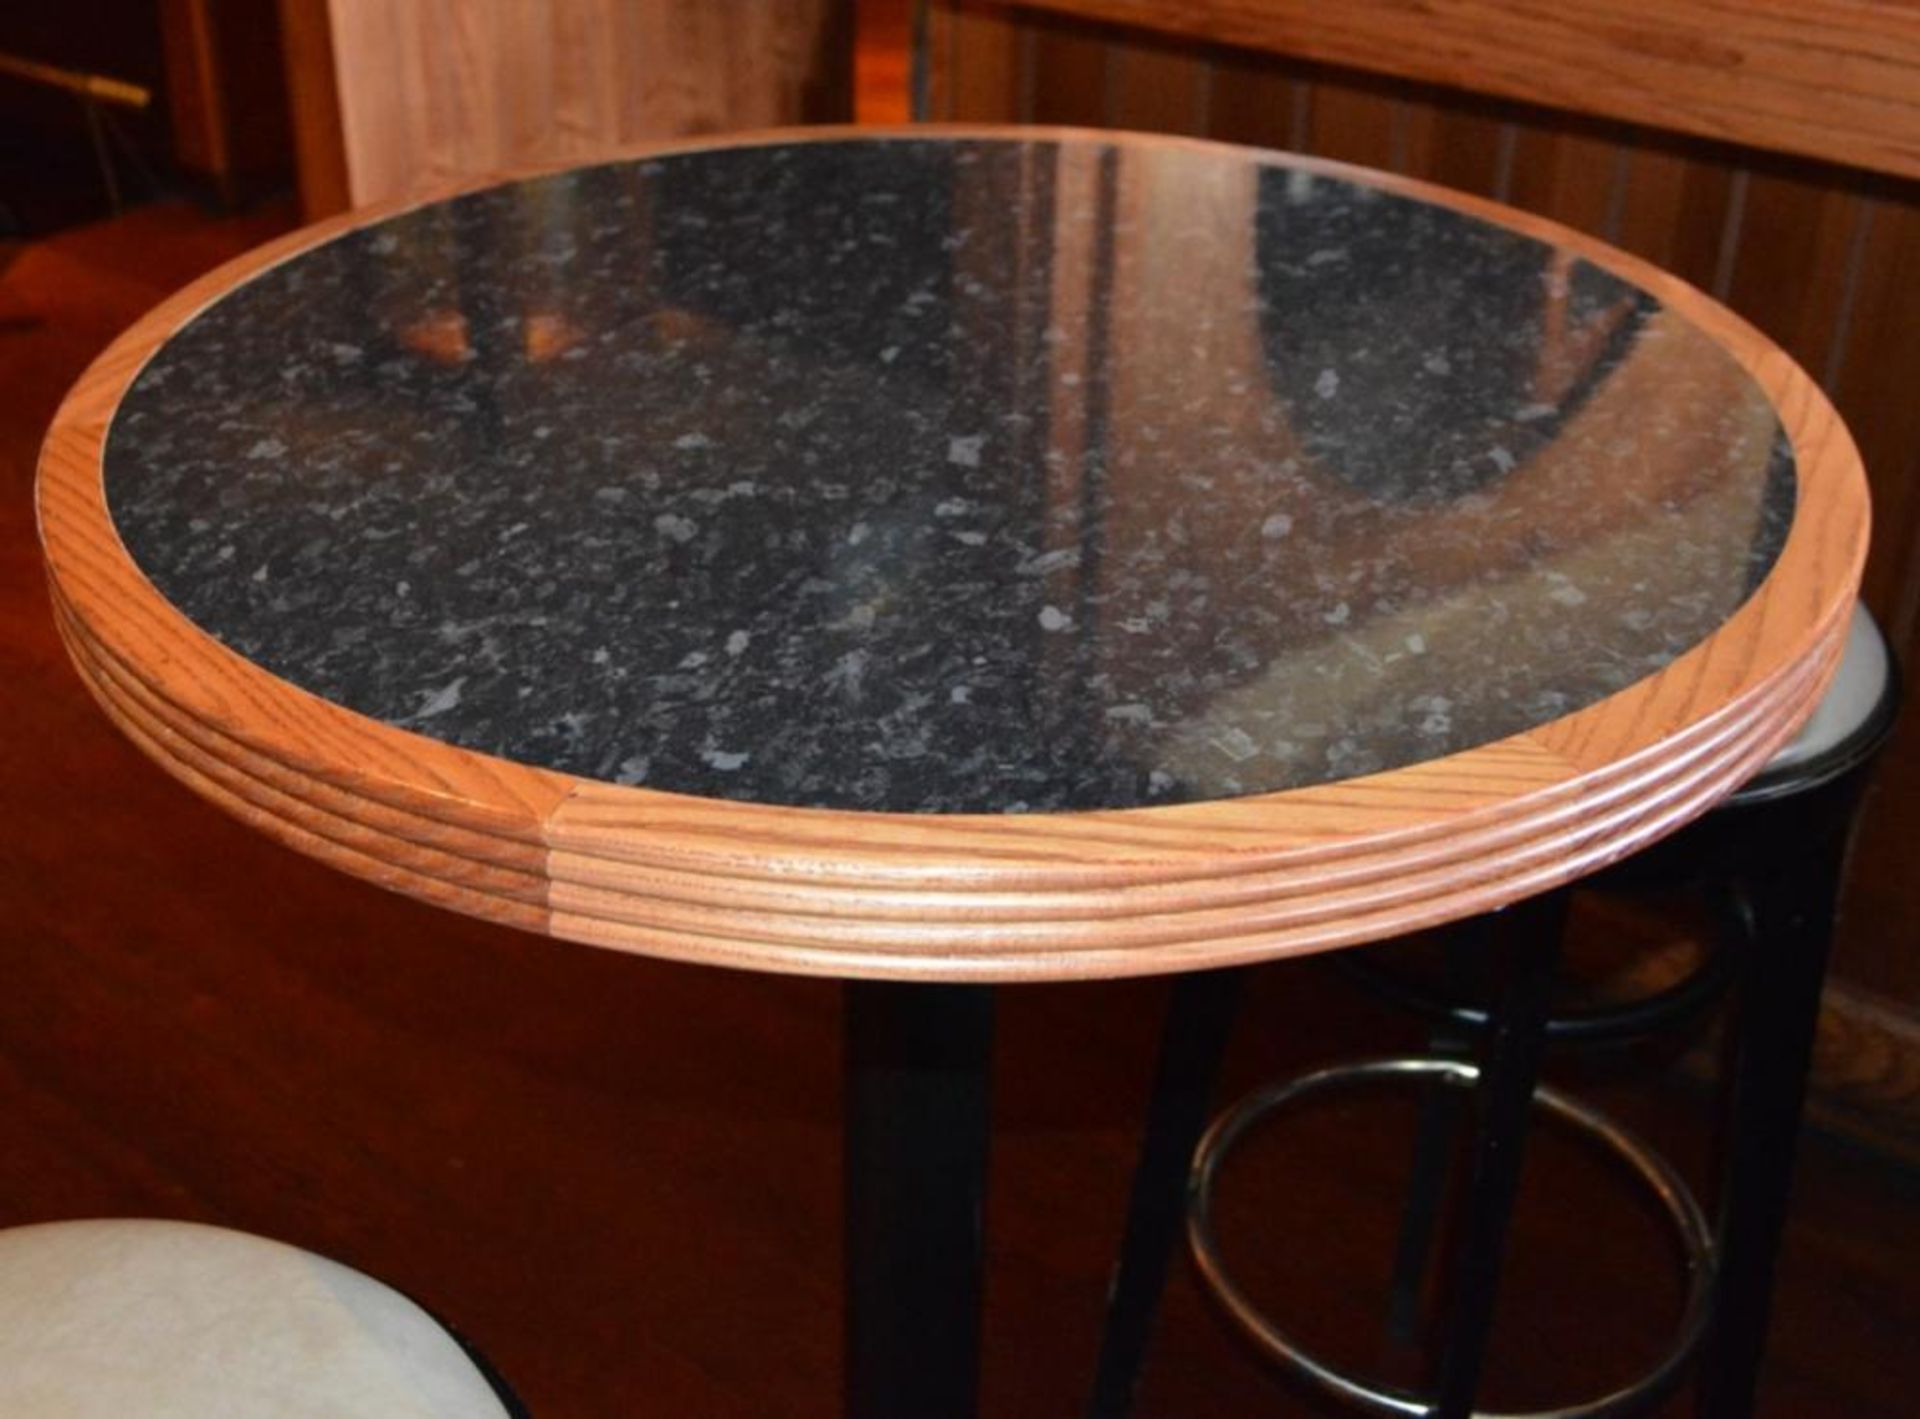 1 x Poser Bar Tables With Granite Effect Surface, Wooden Edging and Cast Iron Base - Includes Two Ba - Image 2 of 4